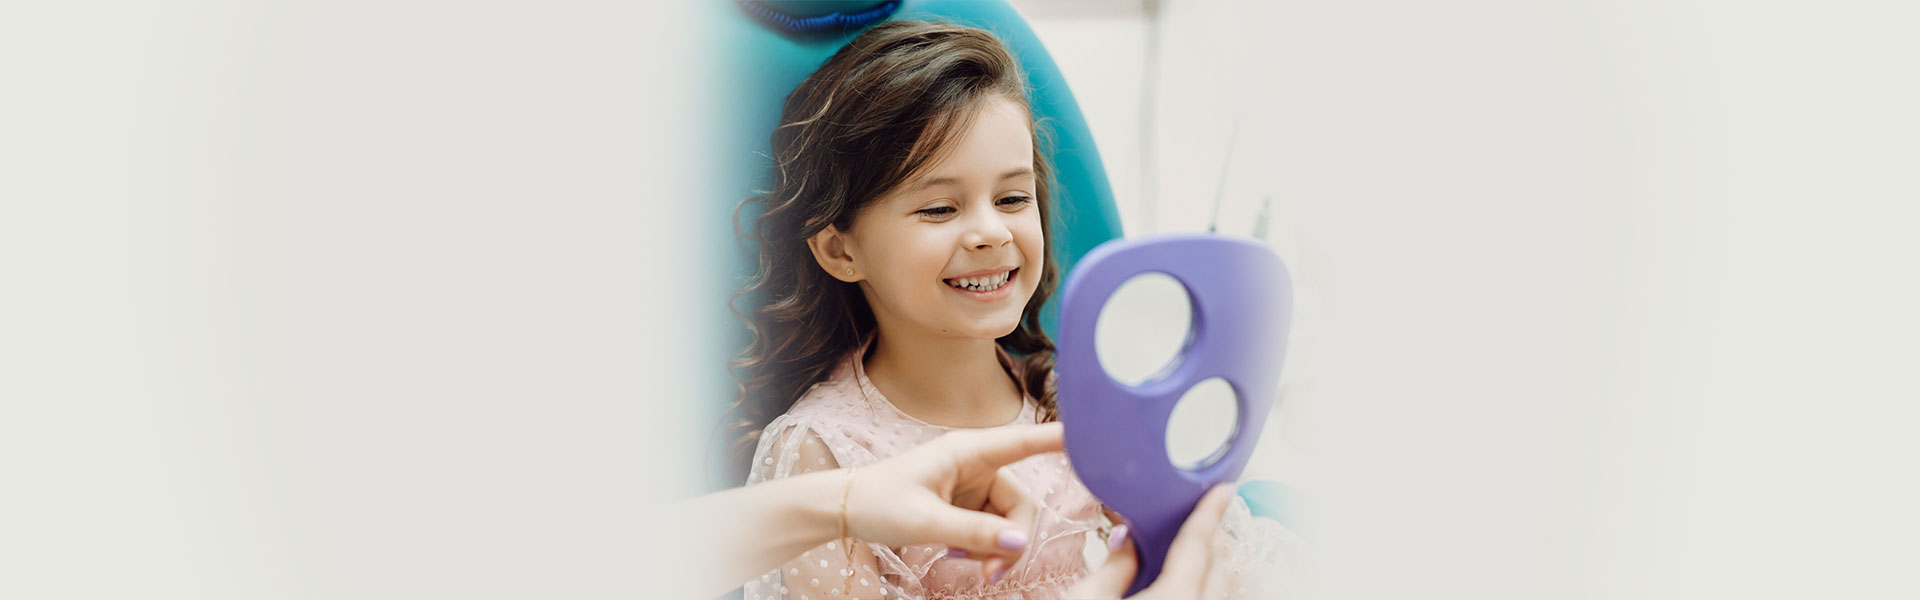 Tooth Extractions for Children: Pediatric Considerations and Procedures